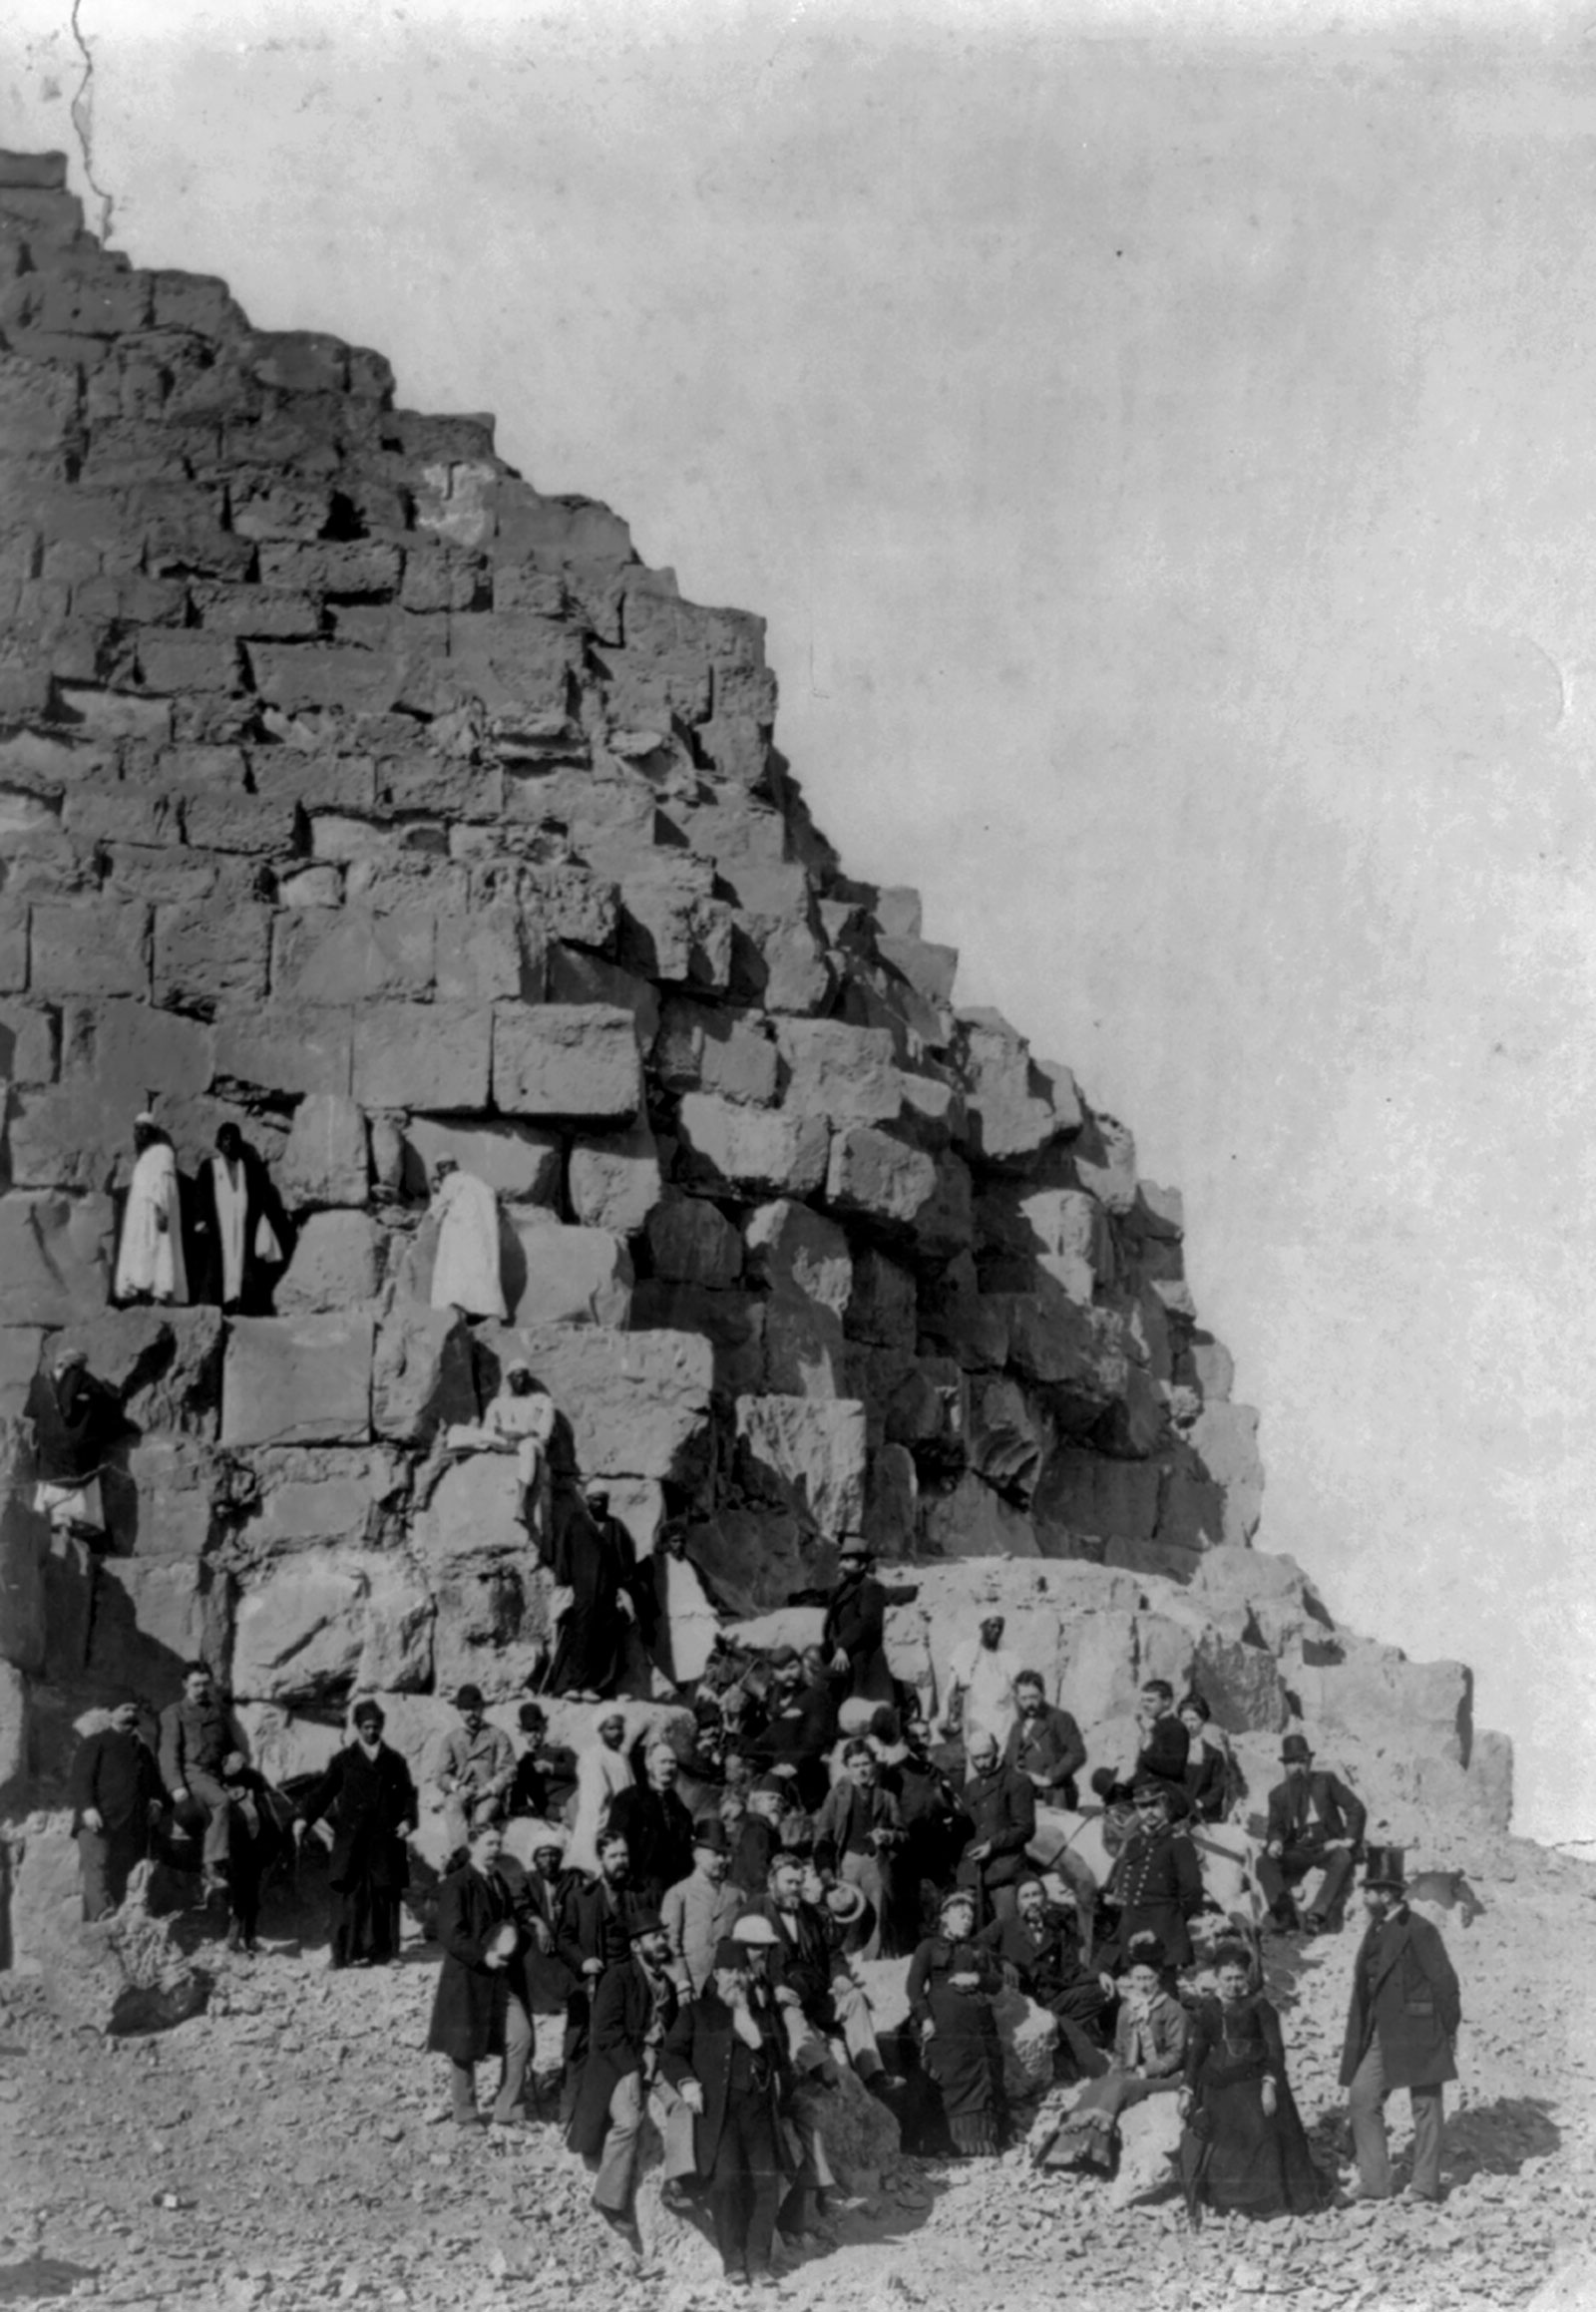 U.S. Grant in the midst of large group of American tourists, Egypt